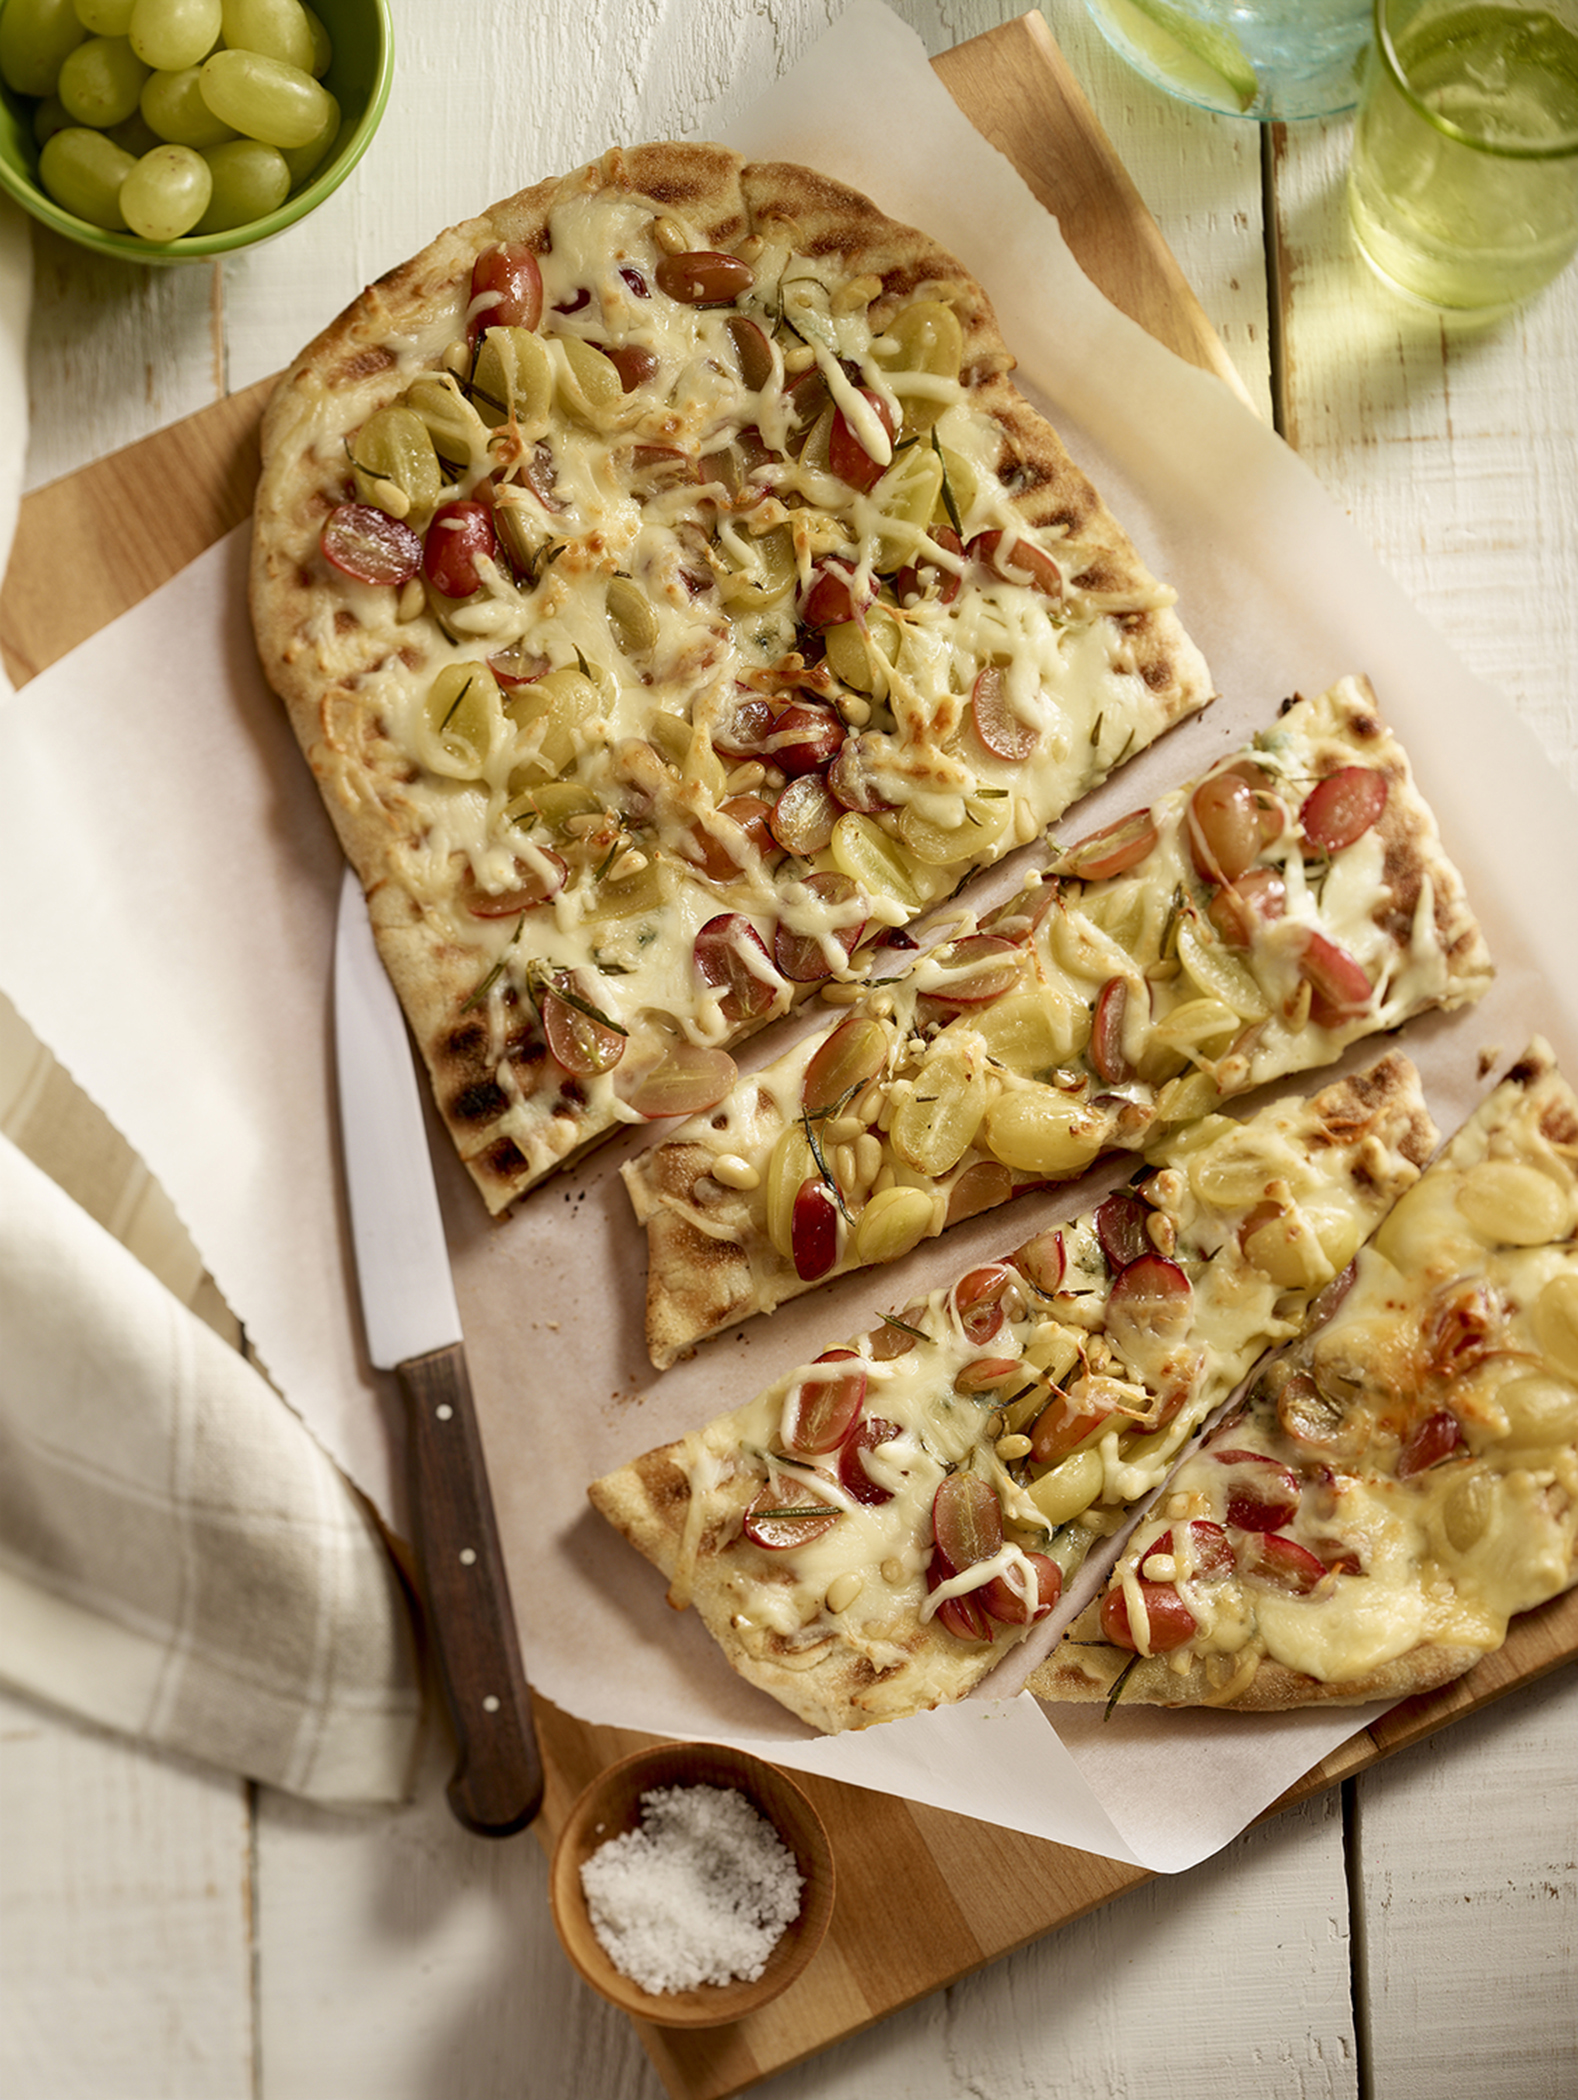 Grilled Pizza with Mozzarellissima, Grapes and Pine Nuts